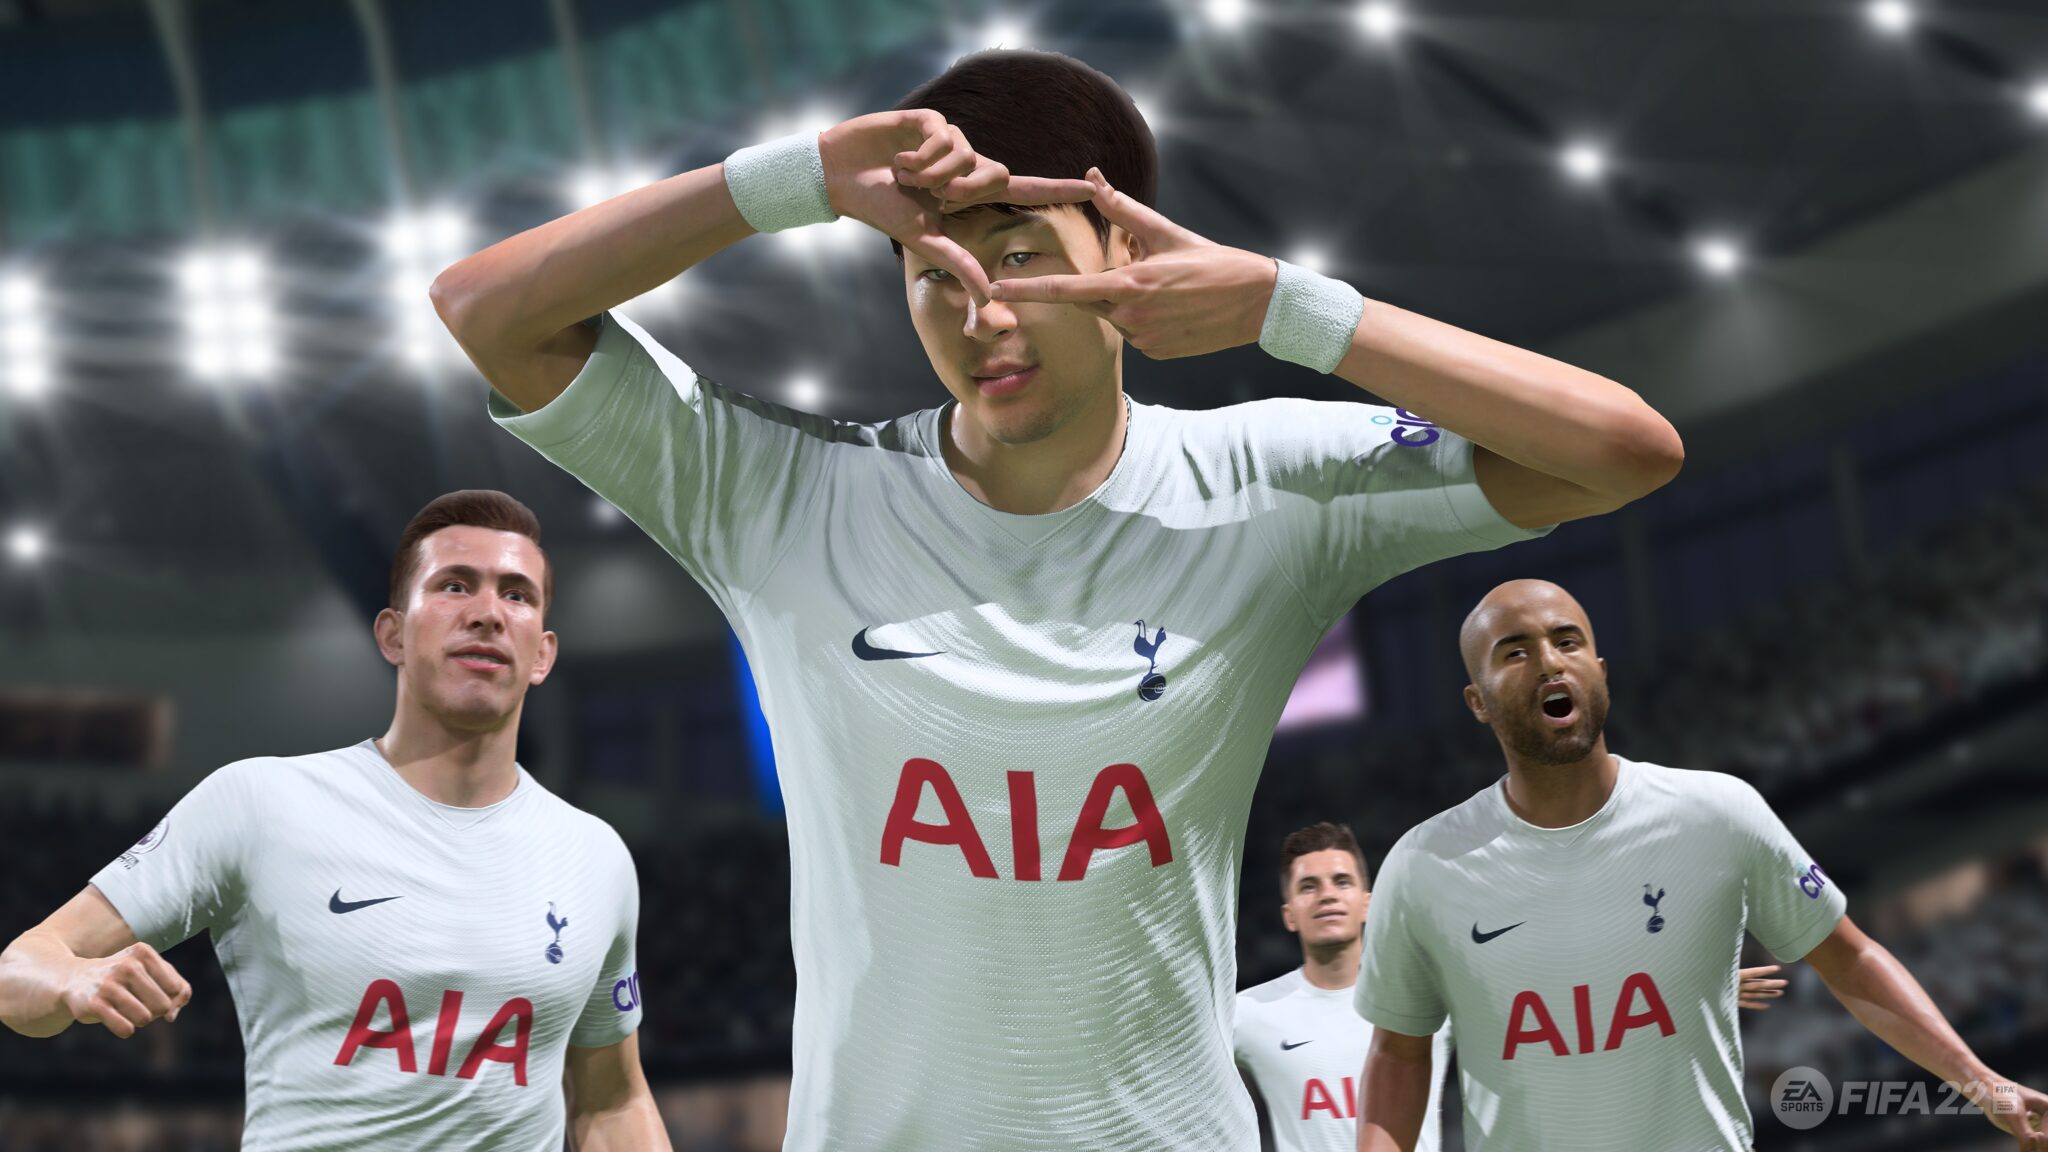 The PC version of FIFA 22 will offer less graphically and technologically than the same game on next-gen consoles.